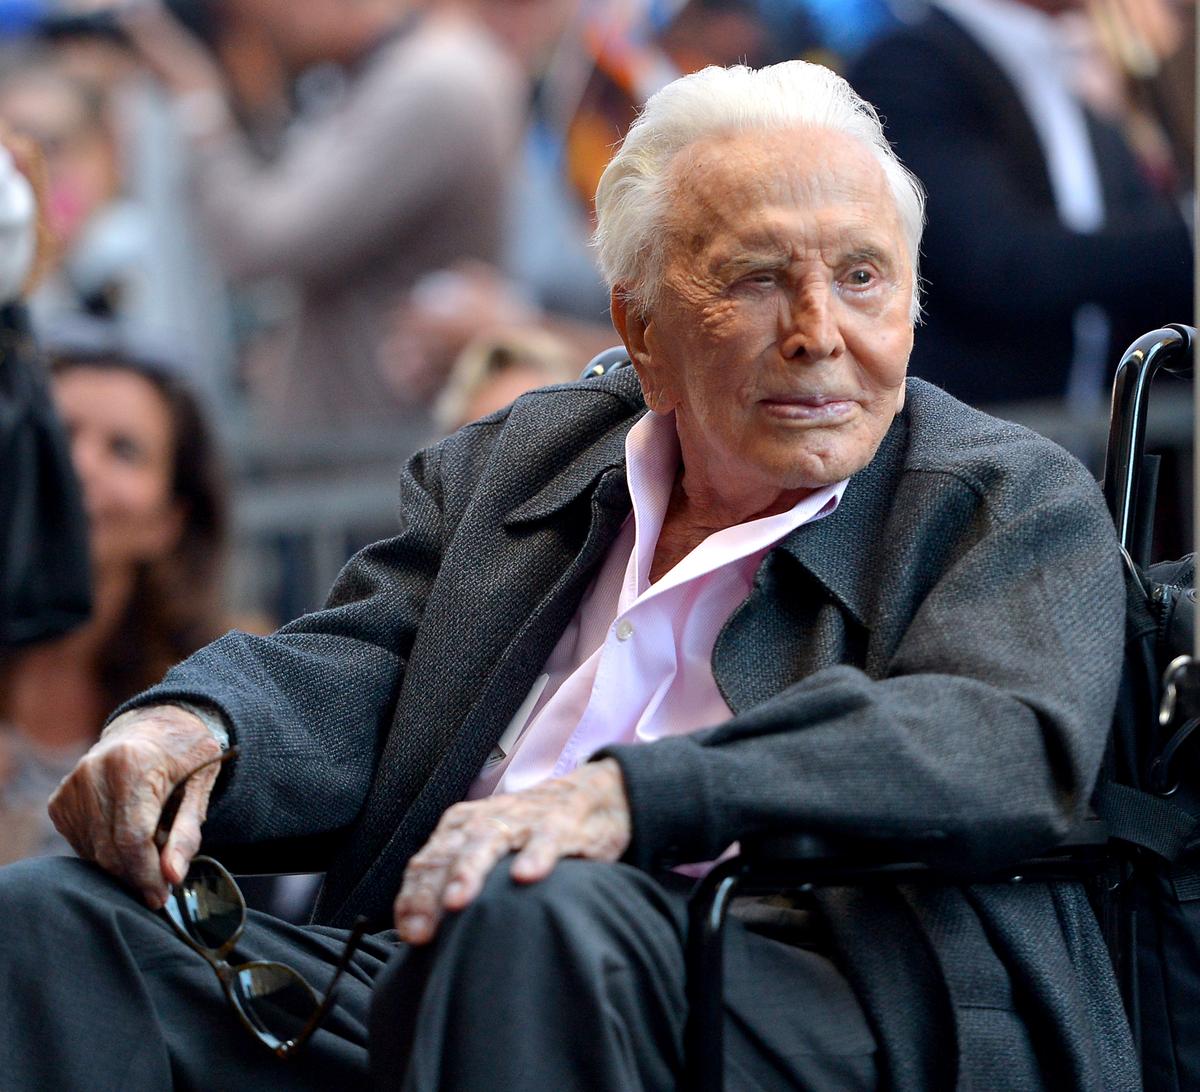 Douglas attends the Hollywood Walk of Fame Ceremony honoring Michael Douglas on Hollywood Boulevard, California, on Nov. 6, 2018. (©Getty Images | <a href="https://www.gettyimages.com/detail/news-photo/kirk-douglas-attends-the-hollywood-walk-of-fame-ceremony-news-photo/1064332890">Charley Gallay</a>)